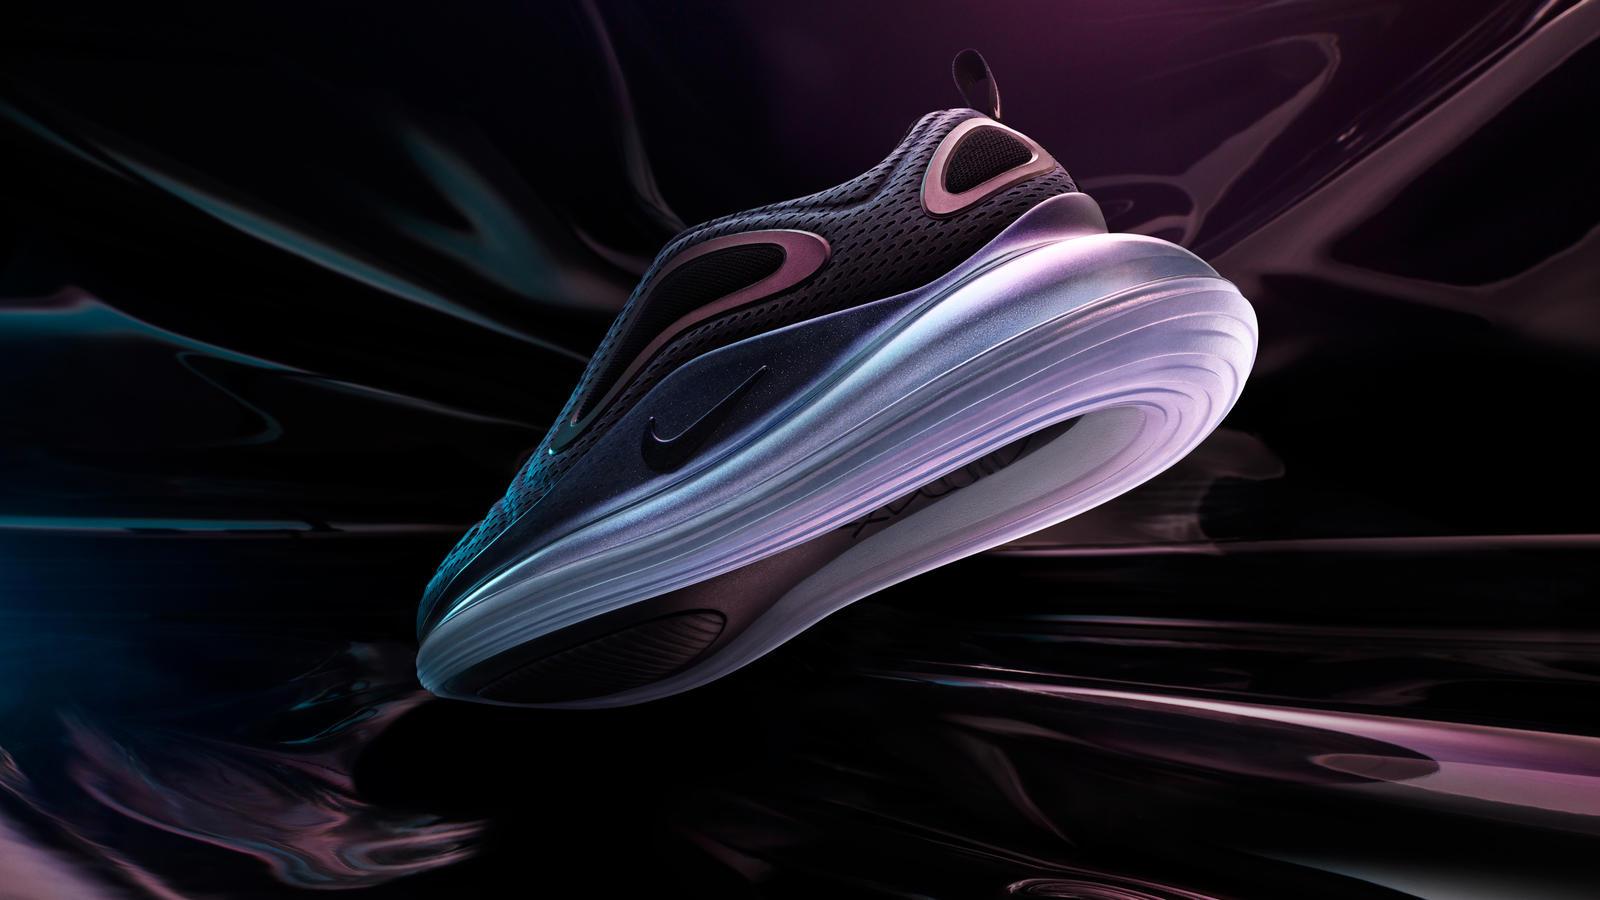 Seven Key Facts About the New Air Max 720